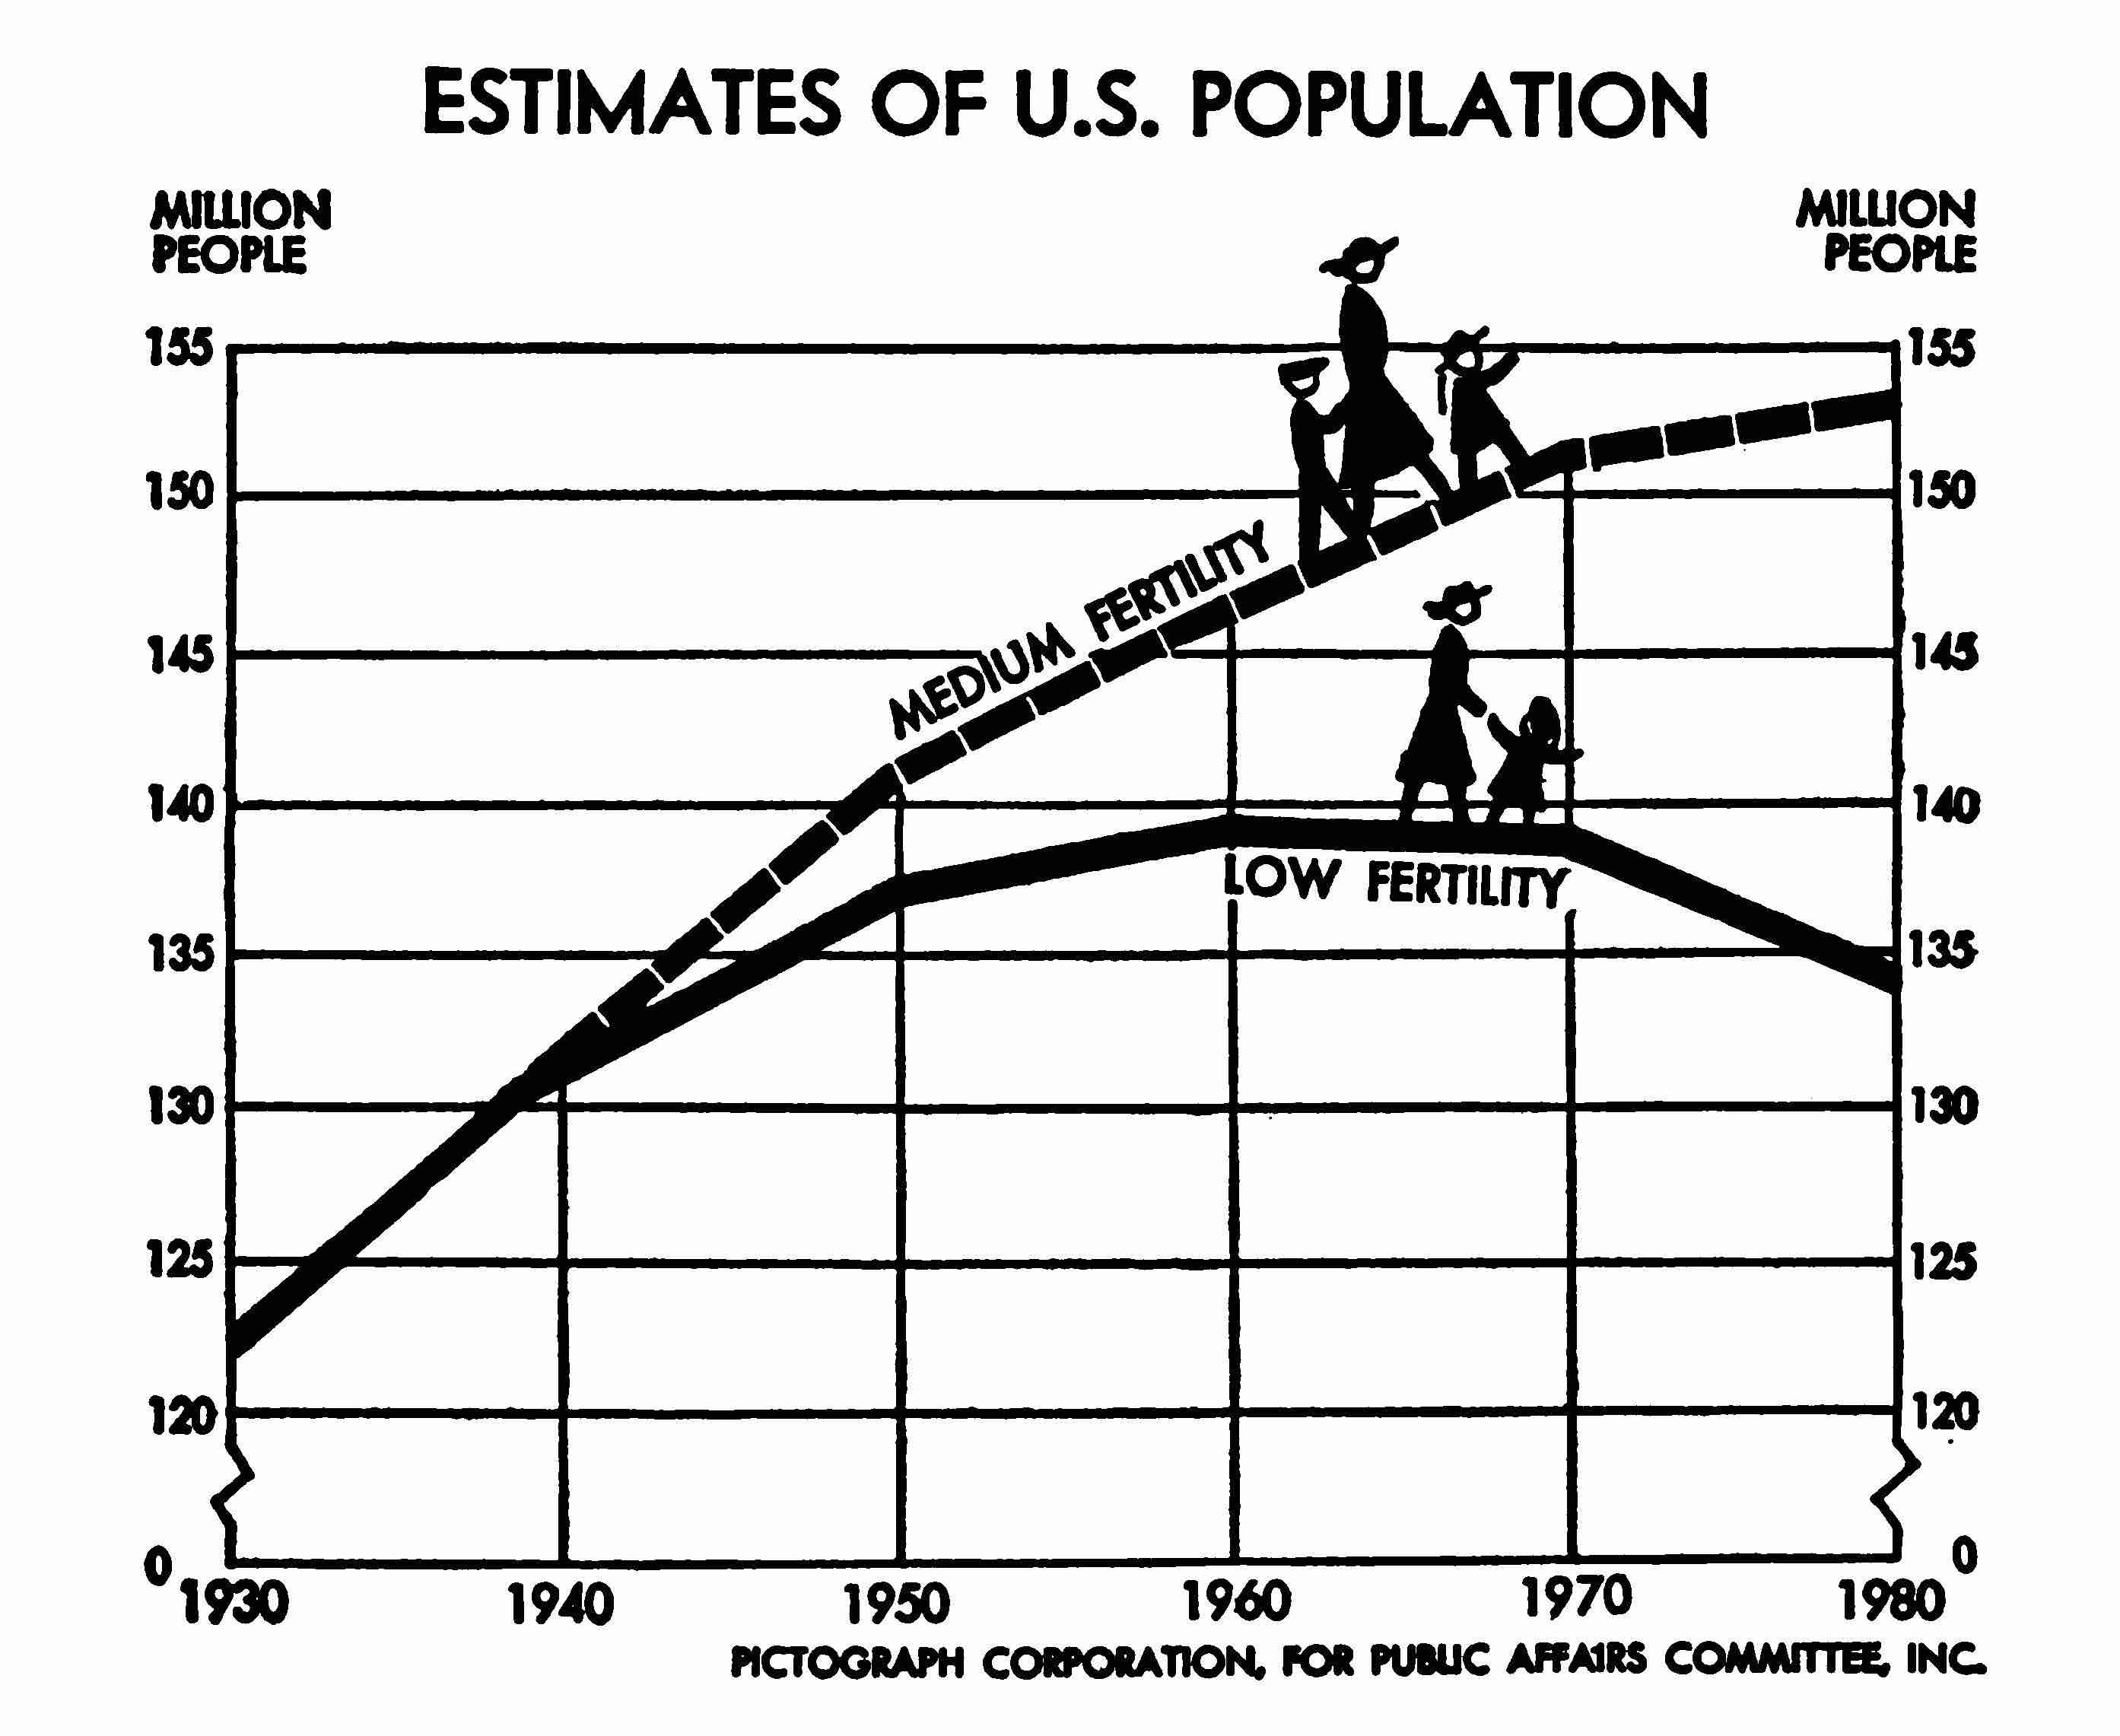 A pictograph with two estimates for U.S. population growth up to 1980, one medium and one low.